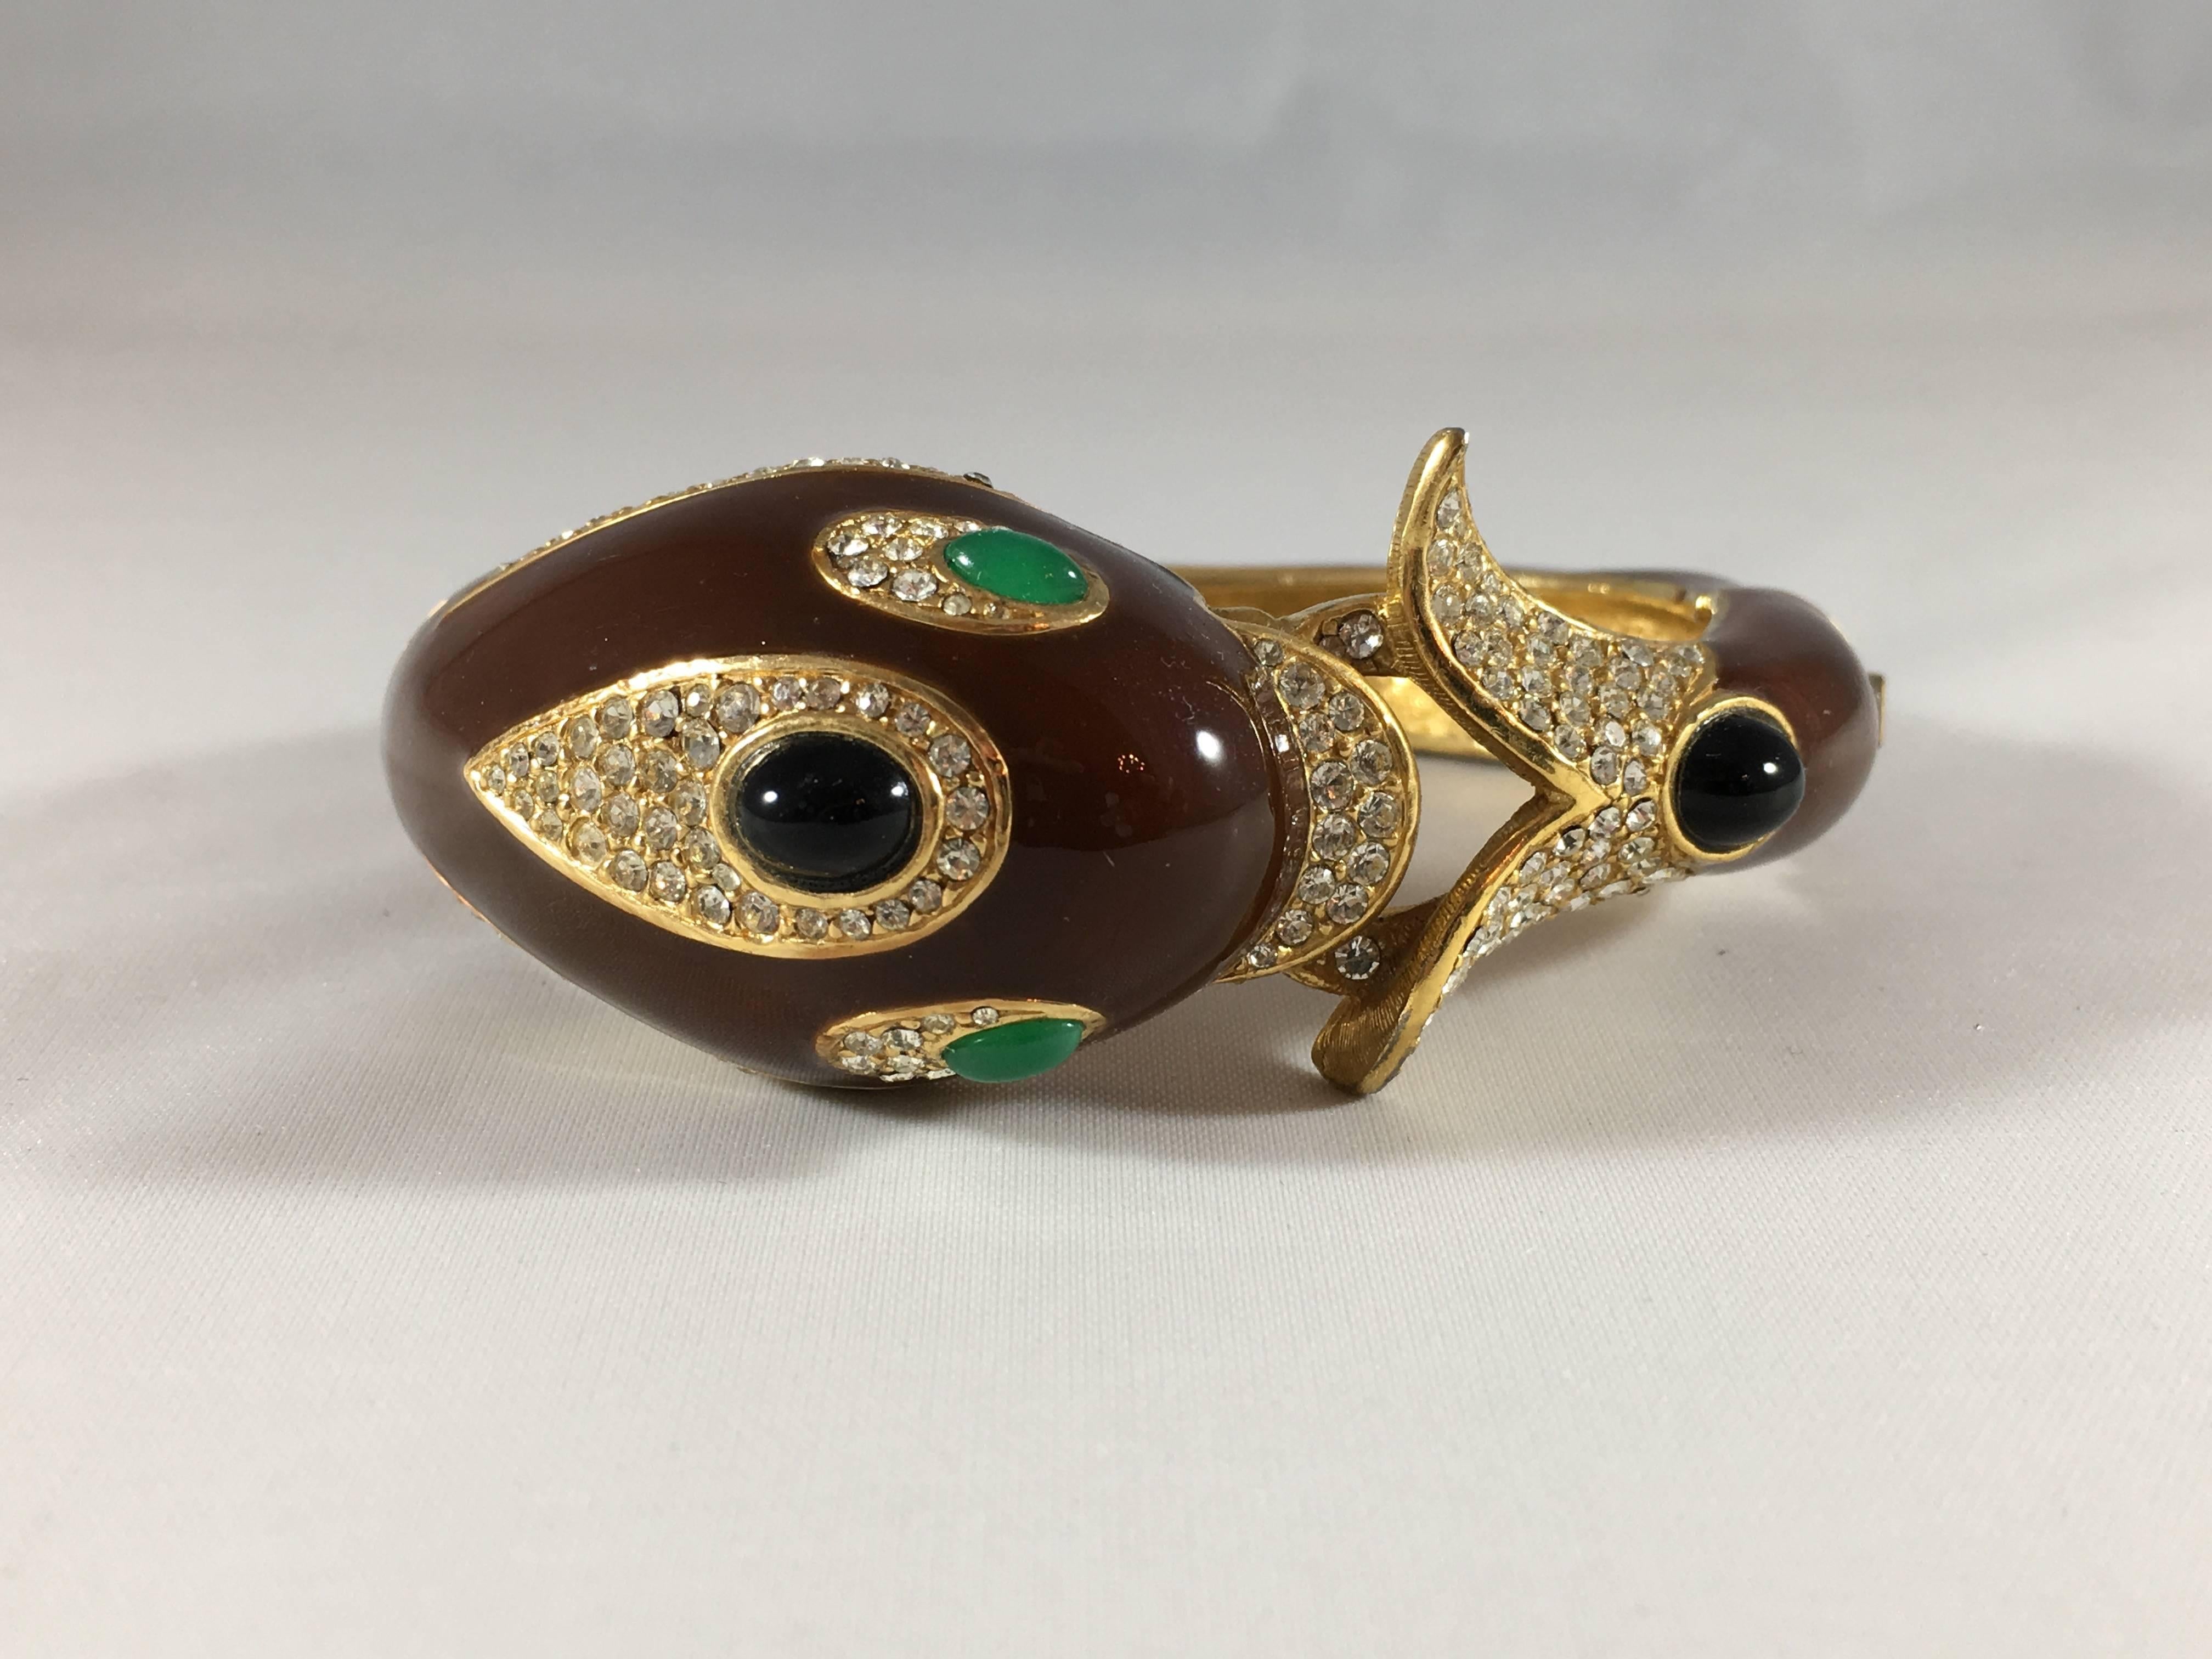 This is a 1970s brown enamel and crystal Ciner dolphin bracelet. It has green glass eyes and measures 1